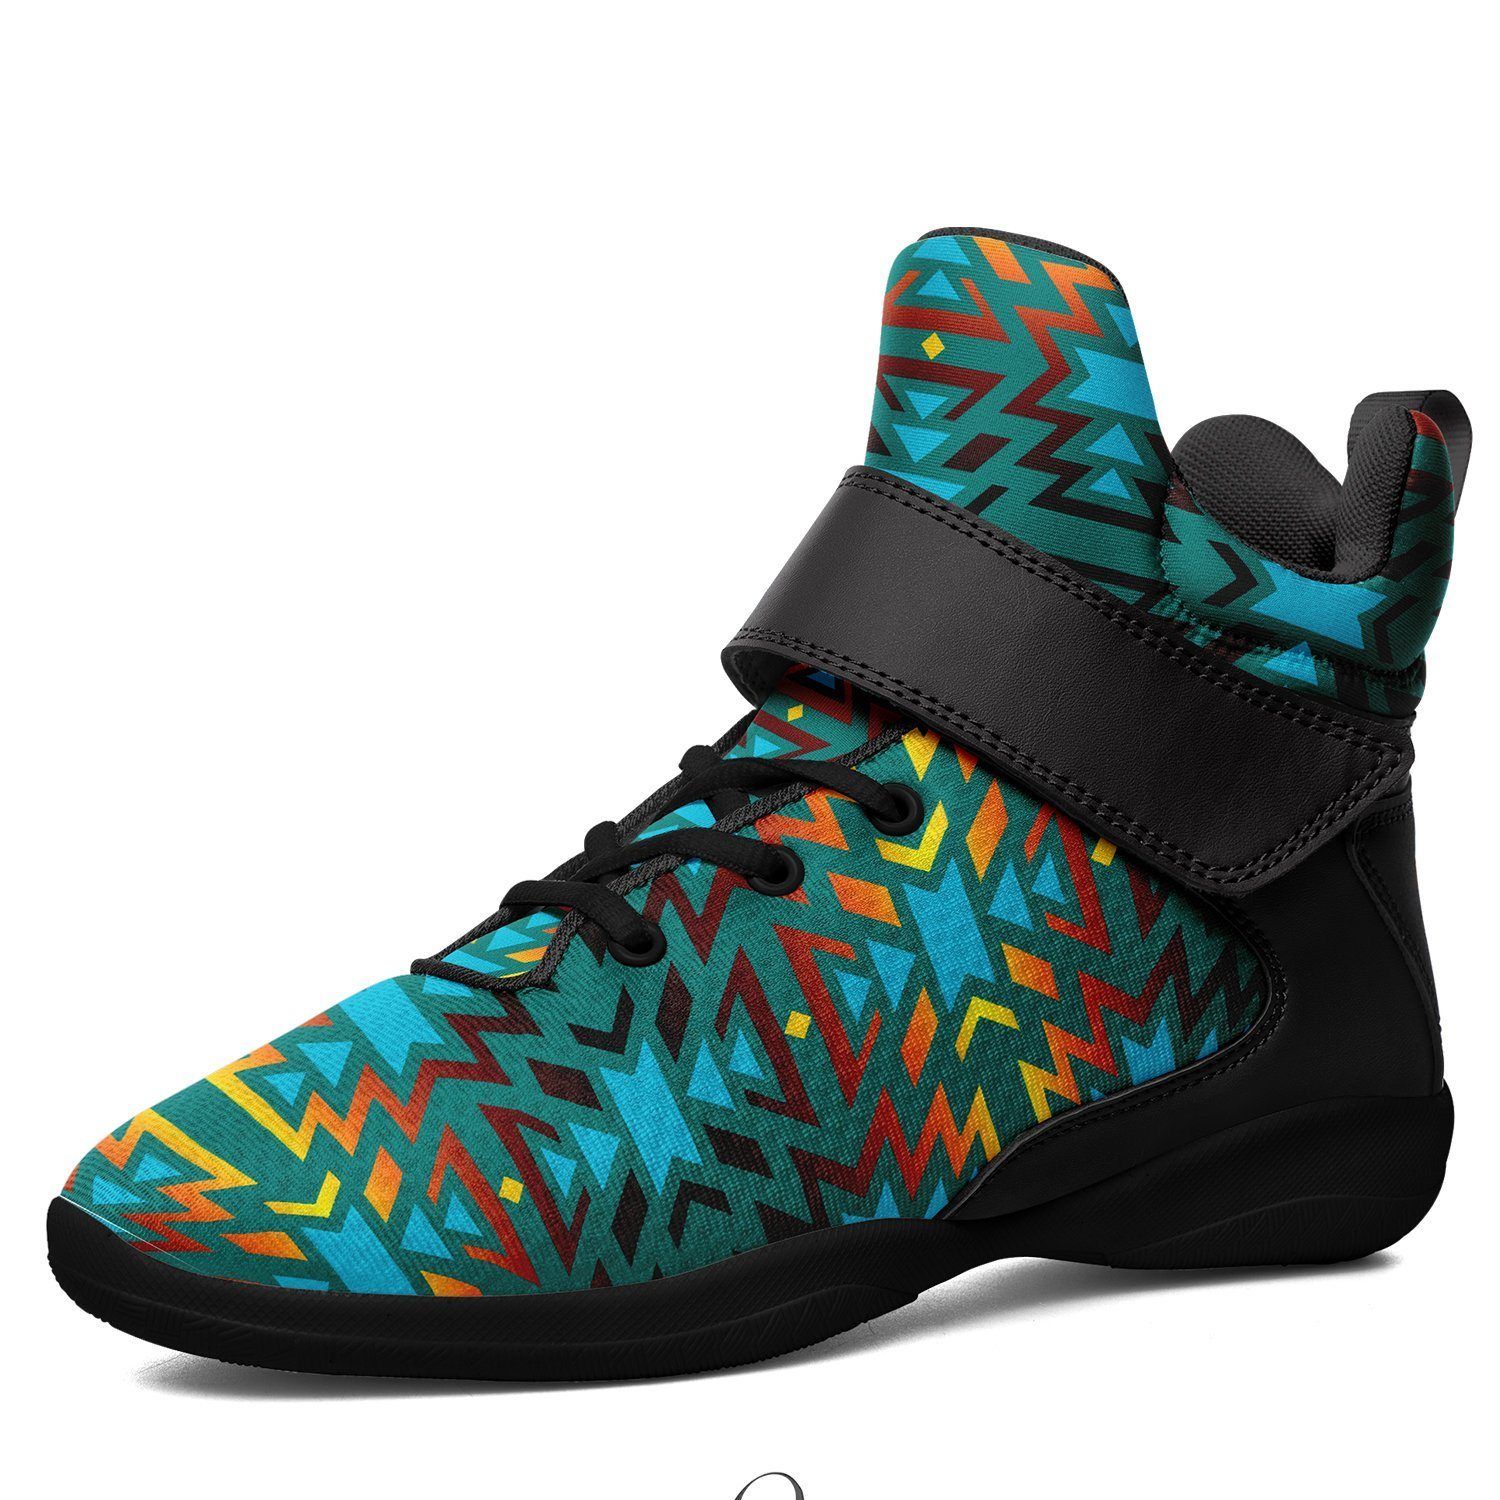 Fire Colors and Turquoise Teal Kid's Ipottaa Basketball / Sport High Top Shoes 49 Dzine US Child 12.5 / EUR 30 Black Sole with Black Strap 